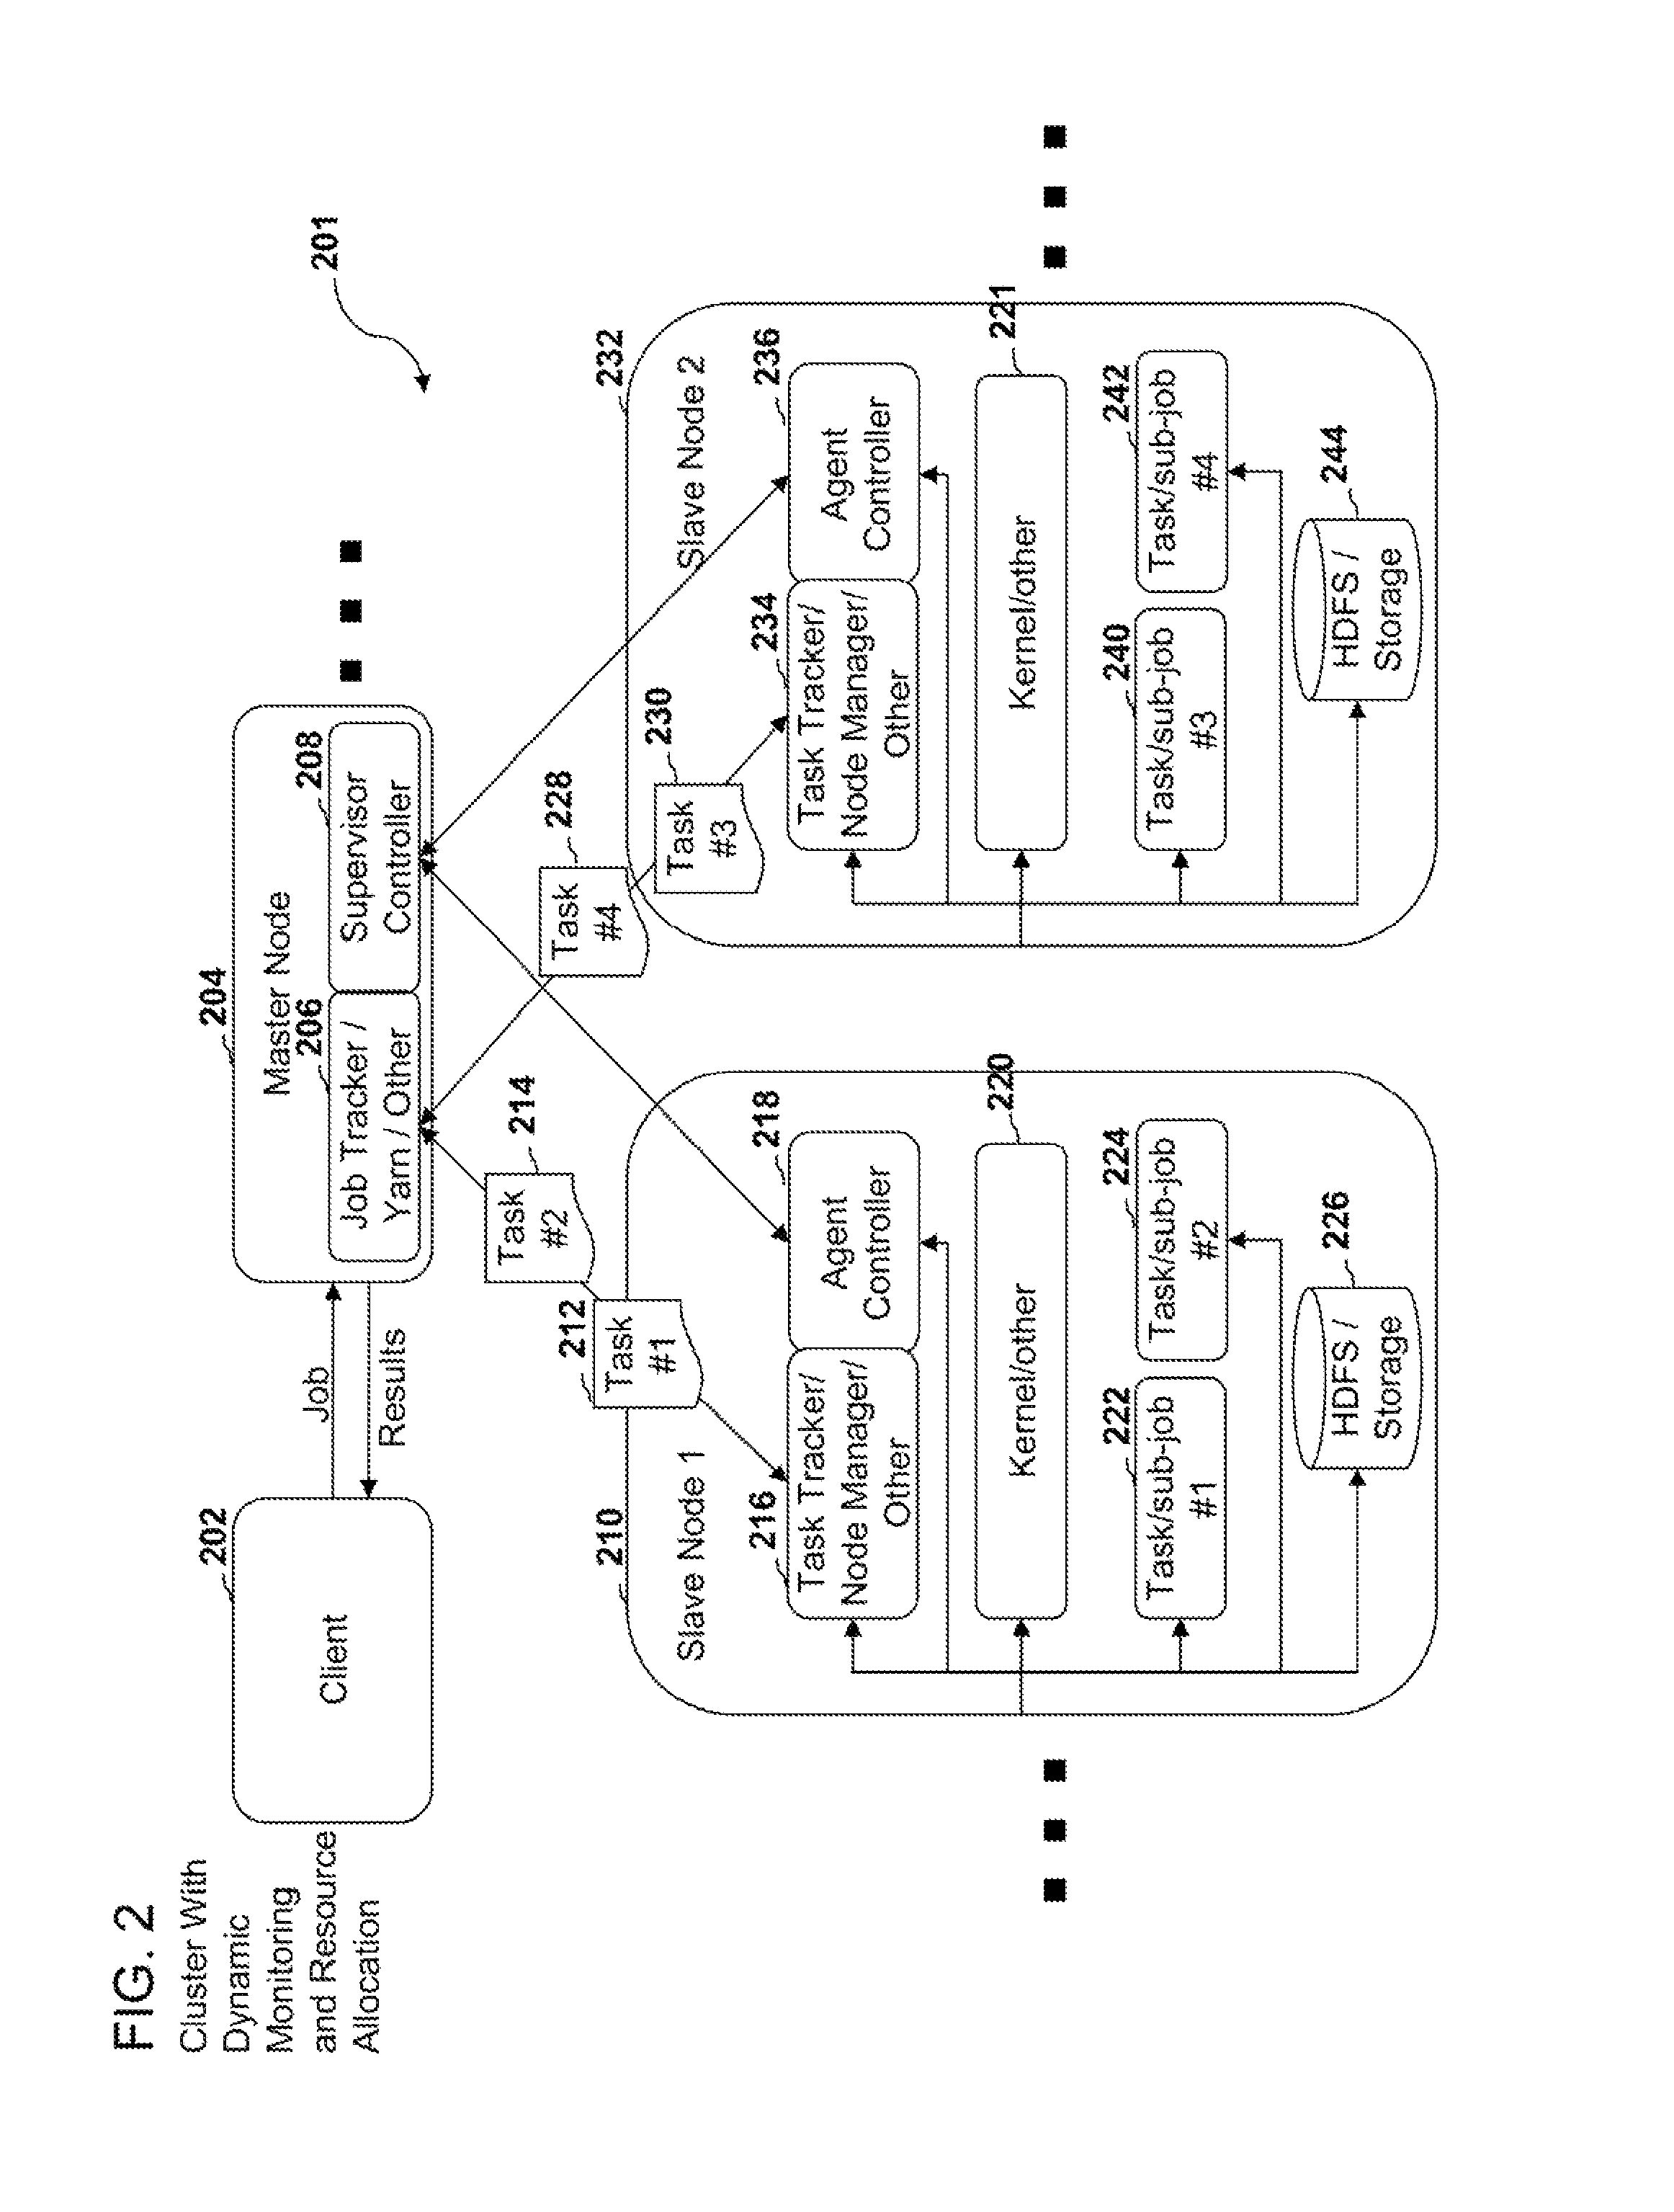 Systems, methods, and devices for dynamic resource monitoring and allocation in a cluster system